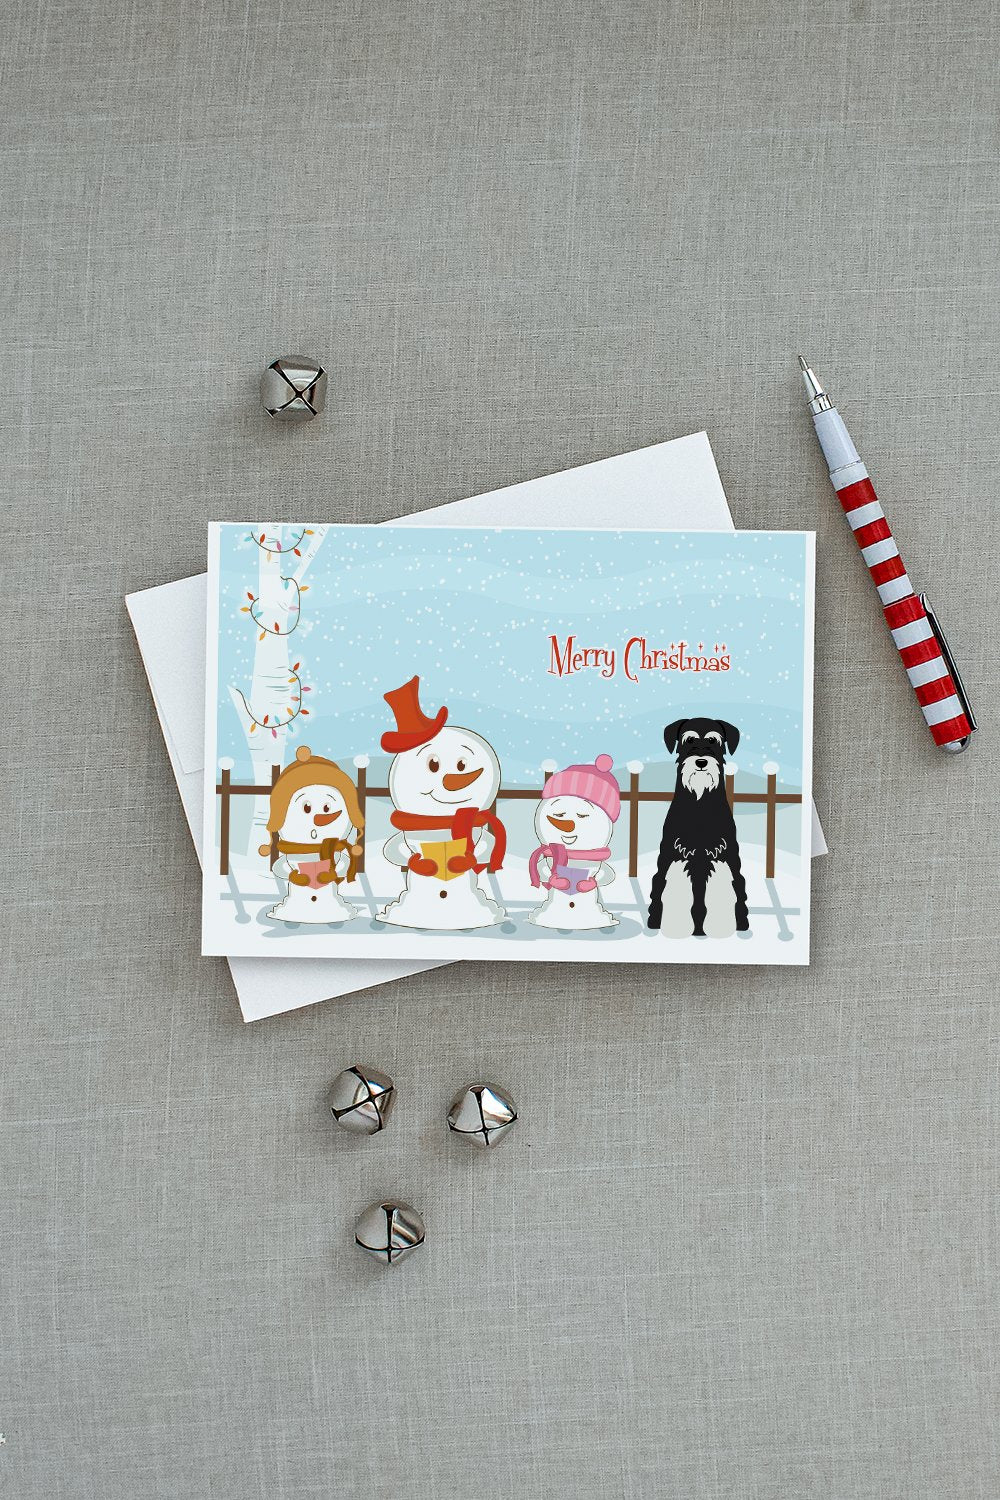 Merry Christmas Carolers Standard Schnauzer Salt and Pepper Greeting Cards and Envelopes Pack of 8 - the-store.com